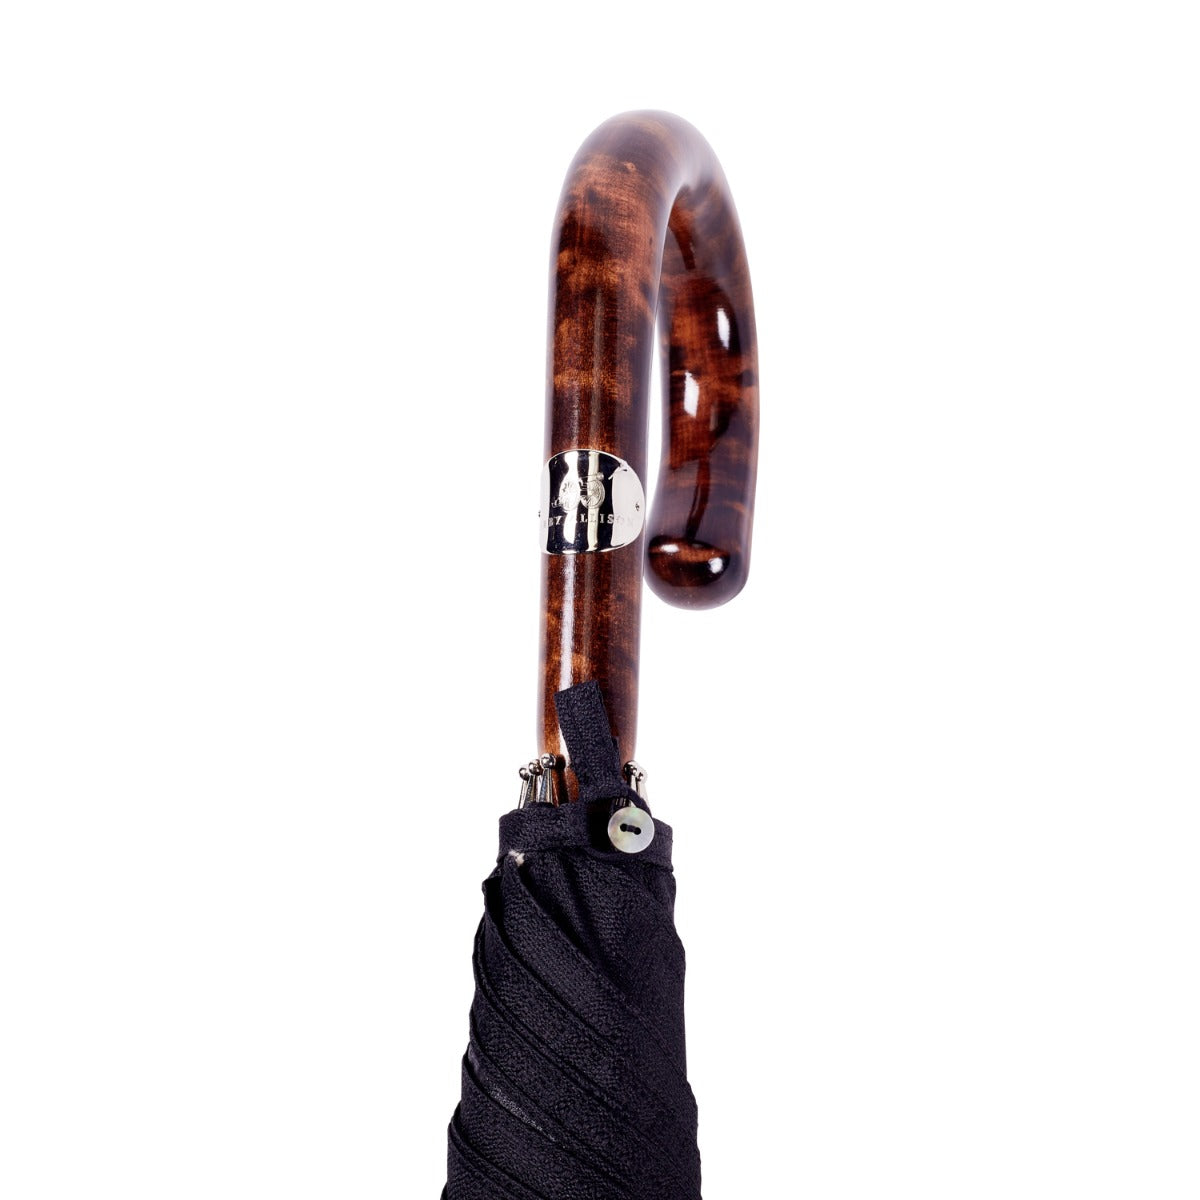 A solid-stick umbrella with a Shiny Tiger Maplewood Handle w/Navy Pinstripe by KirbyAllison.com.